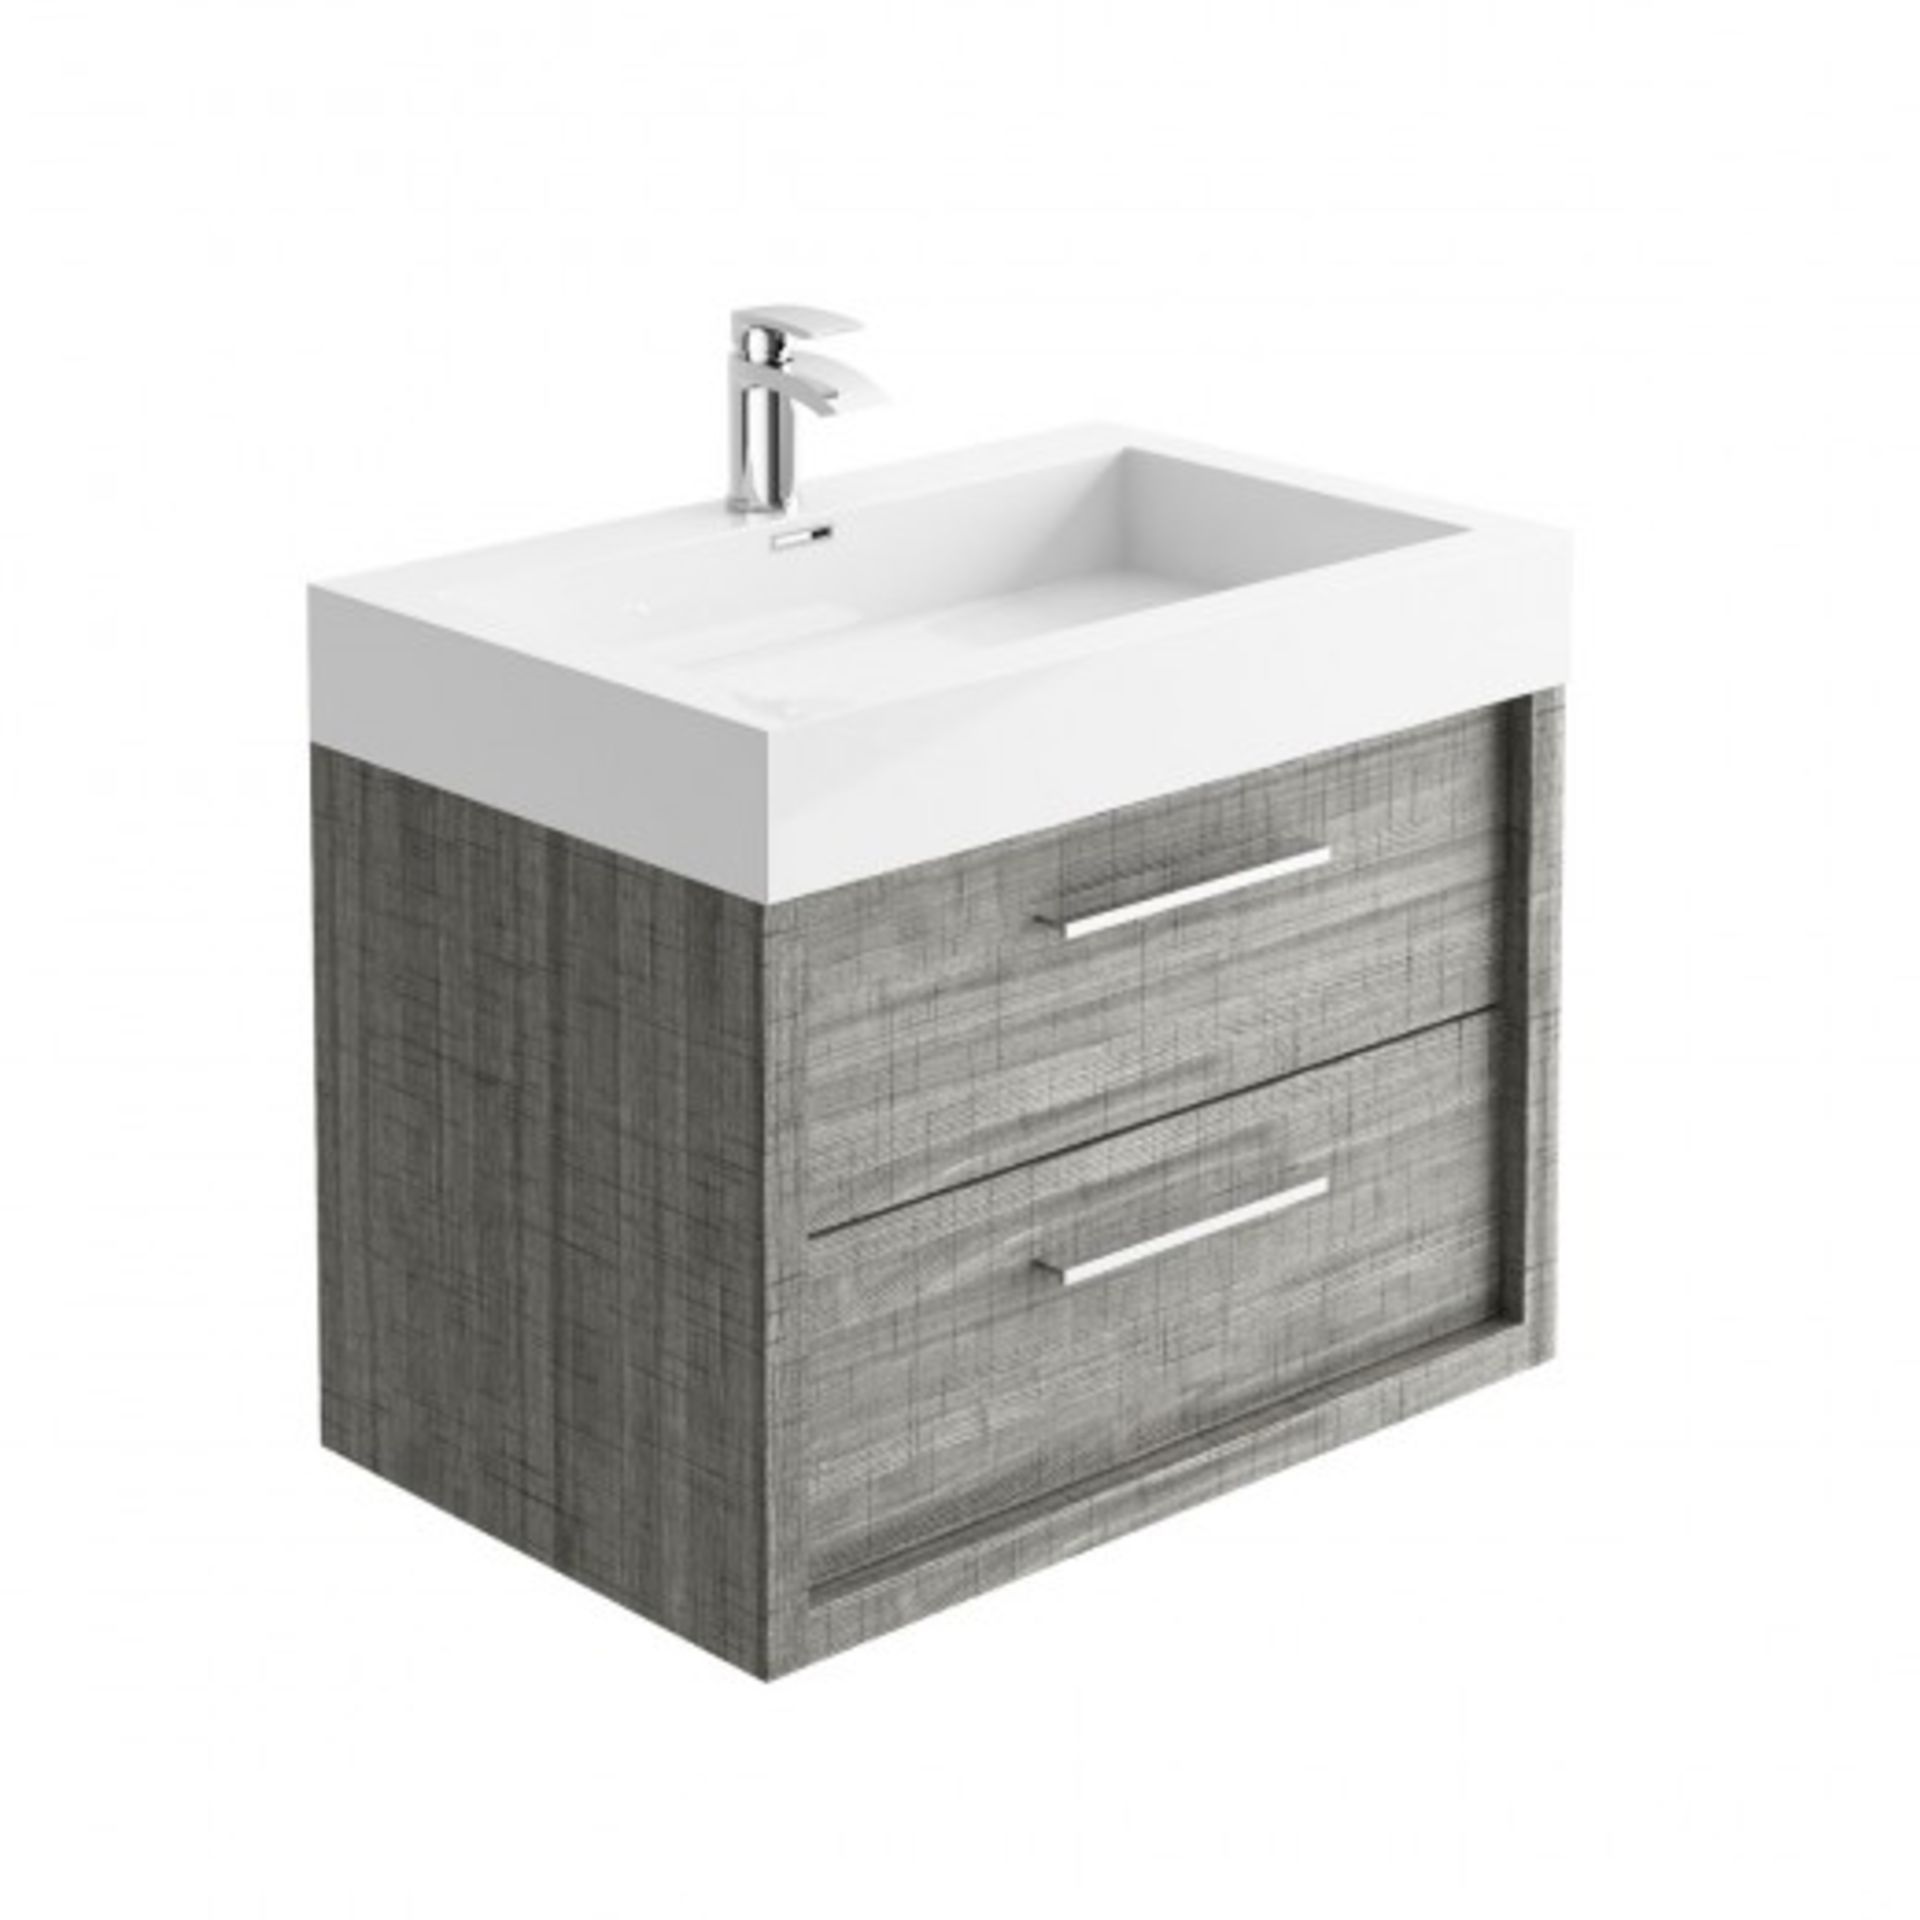 NEW (M57) Winslow 800mm Wall Mounted Vanity Unit & Basin - Grey Ash Effect. RRP £758.00. Comes... - Image 2 of 2